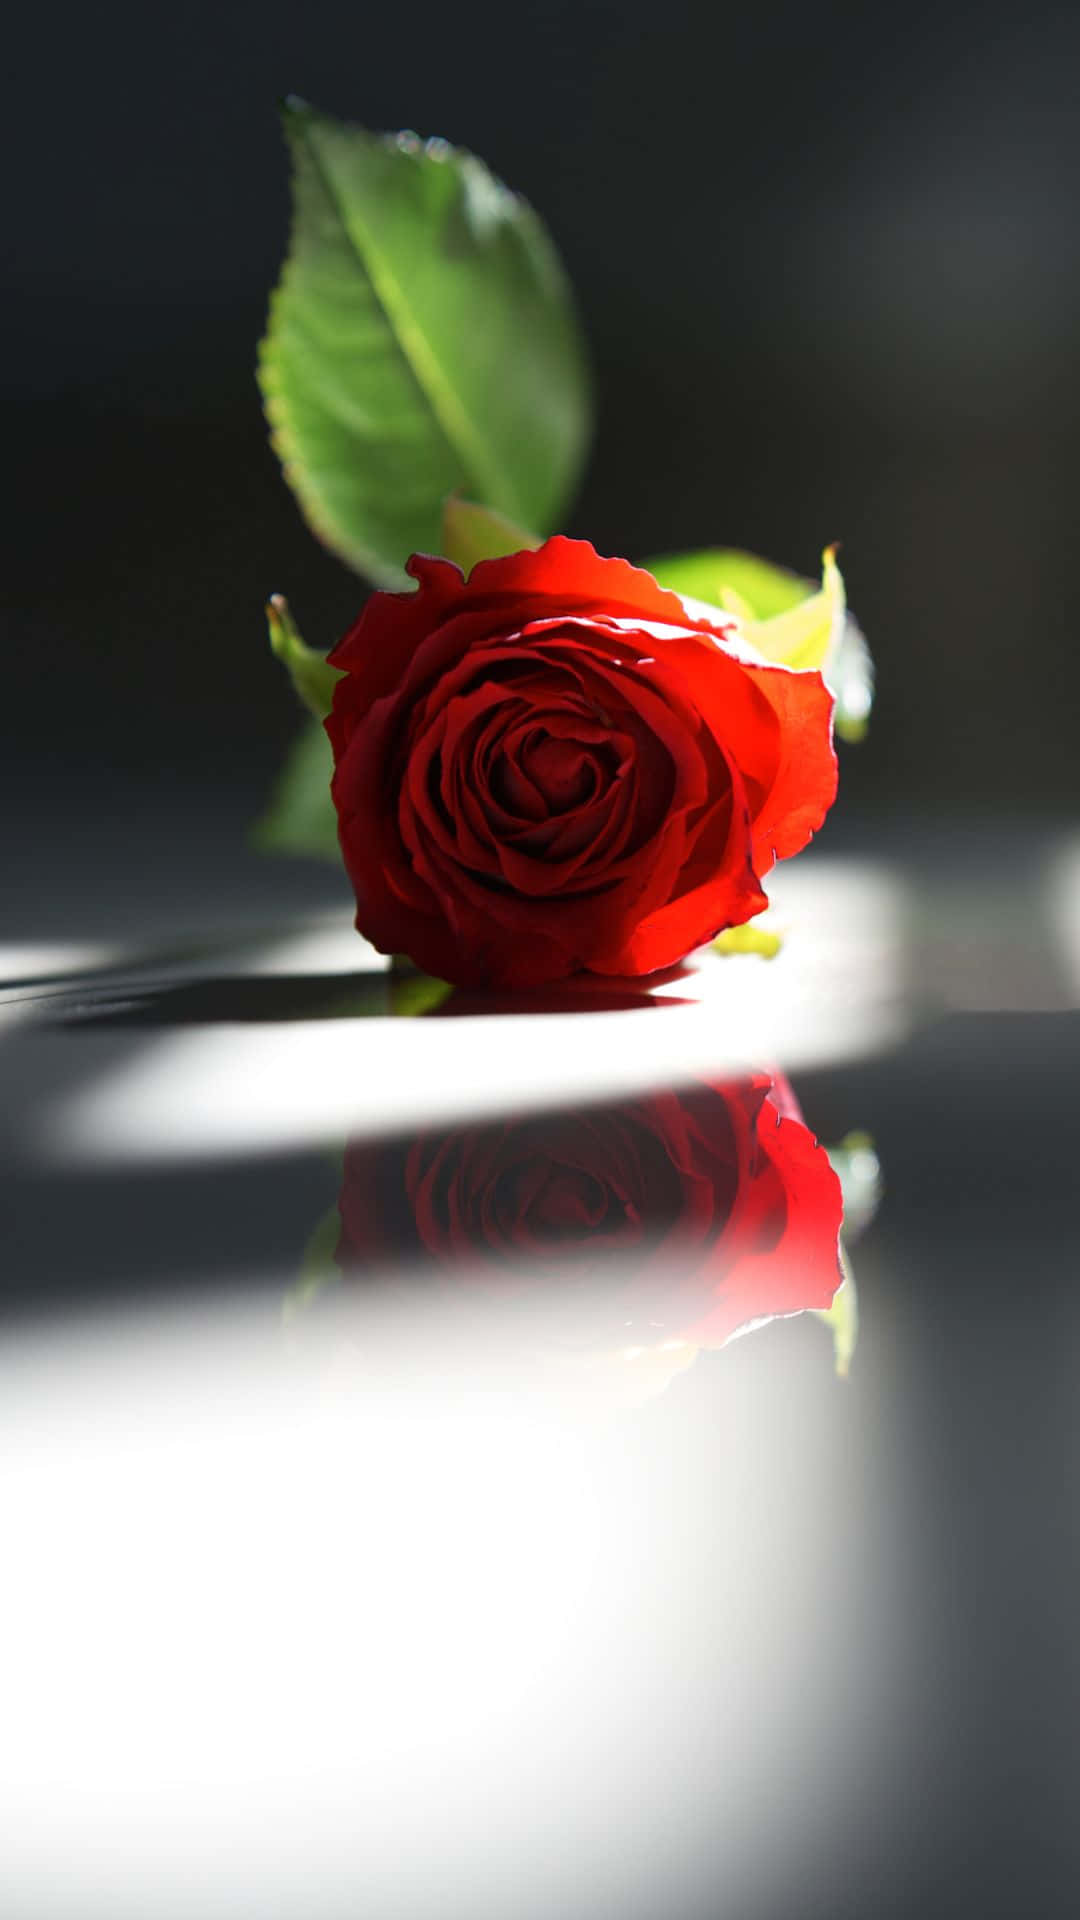 A Red Rose On A White Surface